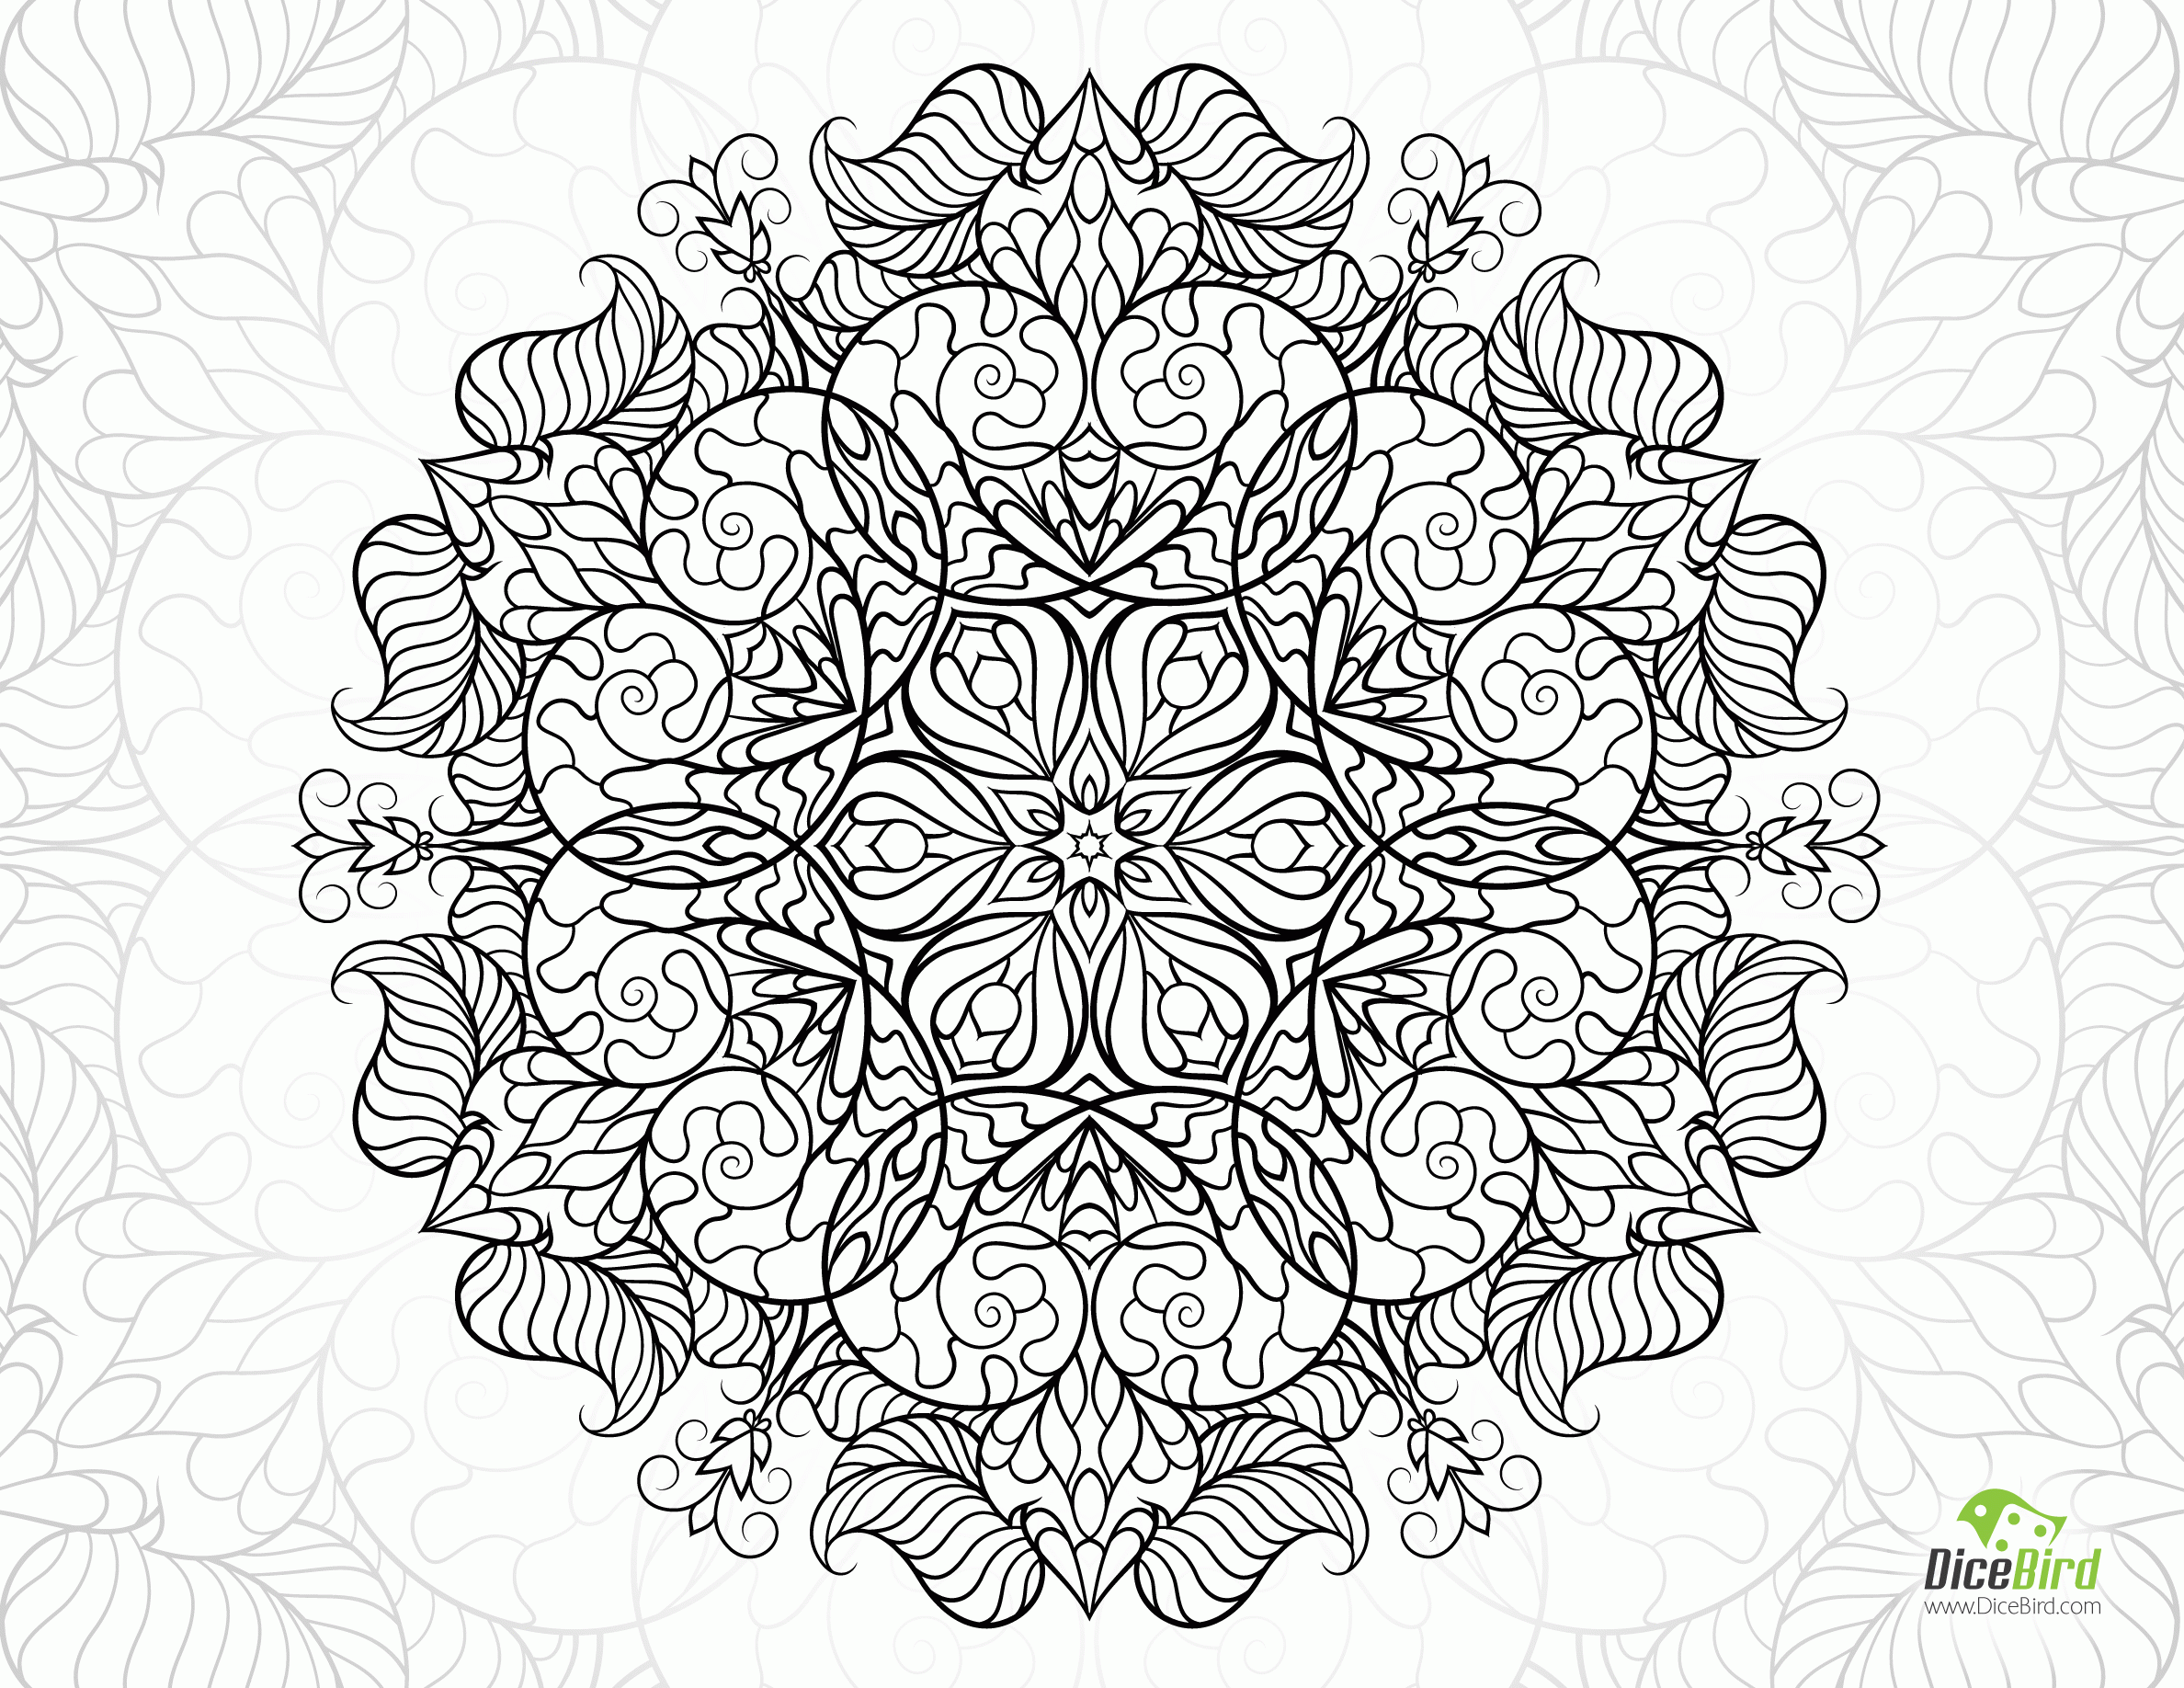 Snail Mandala Flower free hard coloring pages